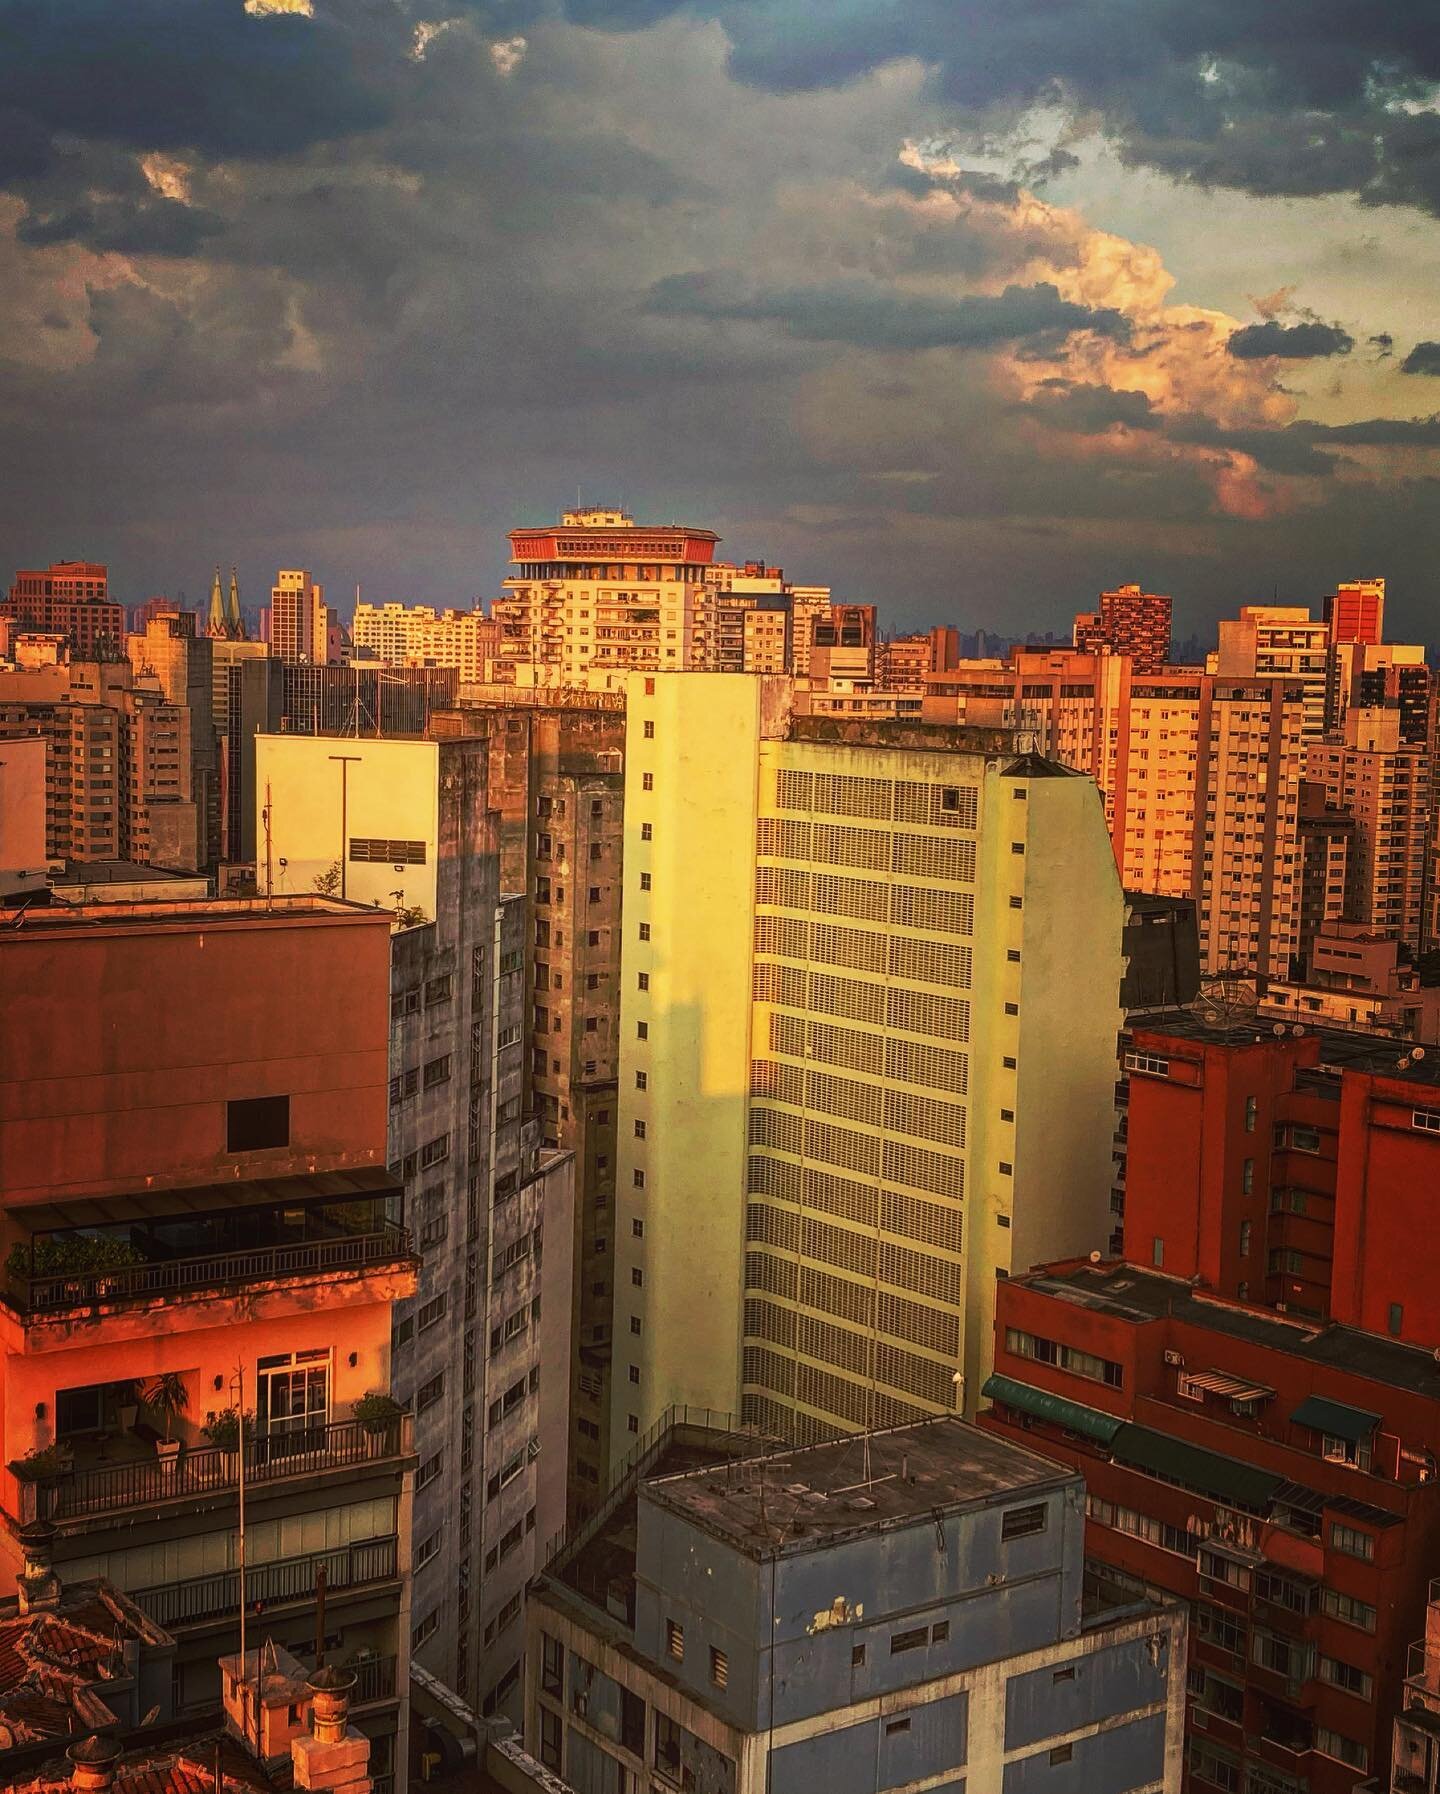 For me, the behemoth city of S&atilde;o Paulo was a warm embrace. I was grateful for those who kissed my cheek and made me feel safe and happy to say, &ldquo;Prazer.&rdquo; I was grateful for all those who met me by Muindi&rsquo;s side and shared the